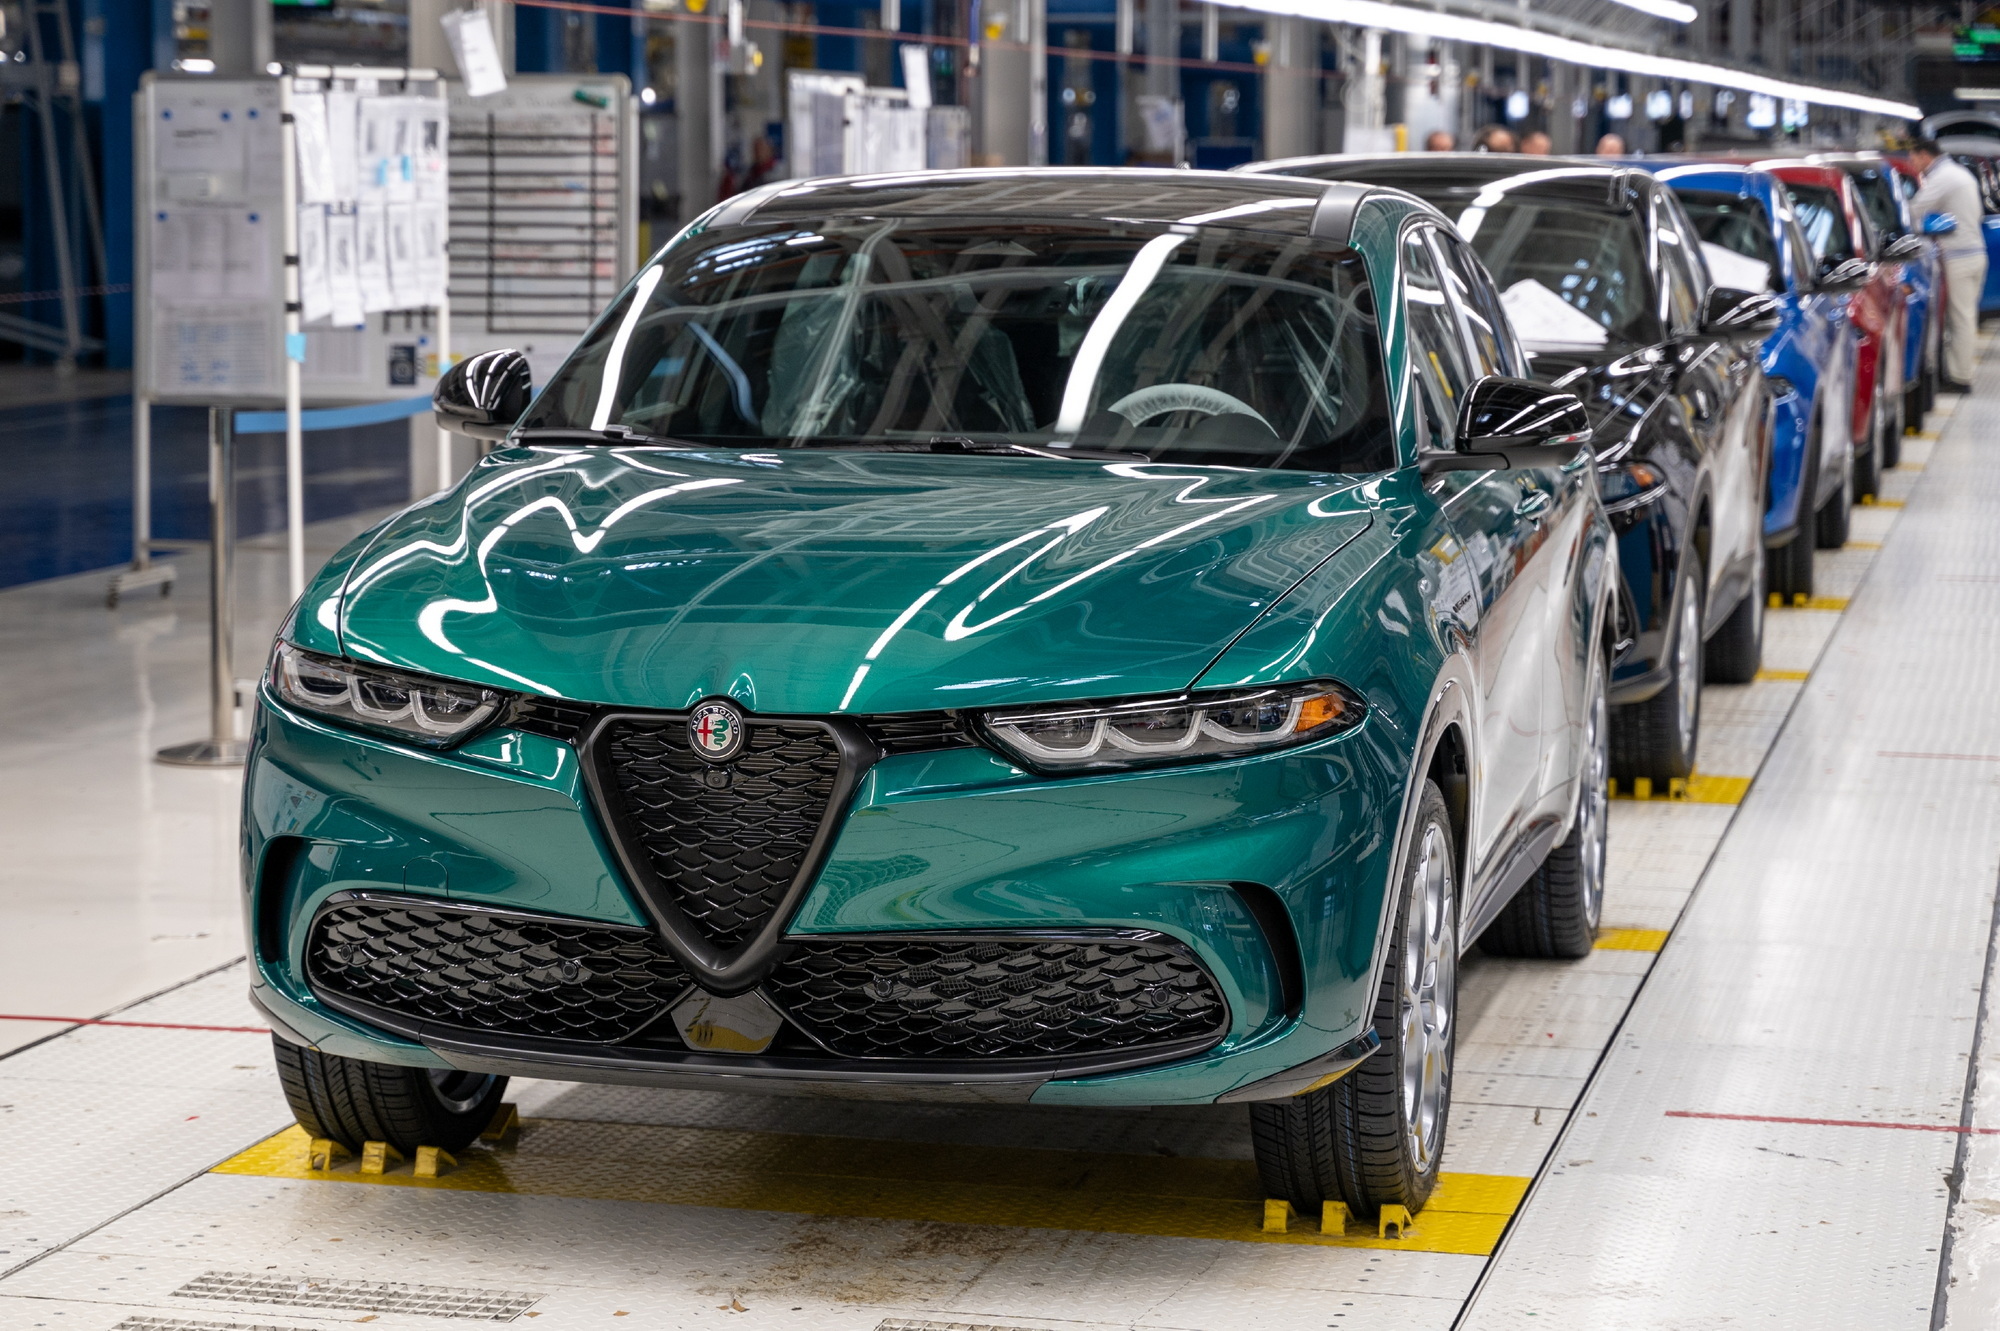 2024 Alfa Romeo Tonale Lands In The US, Gets 29 MPG And Can Travel 33